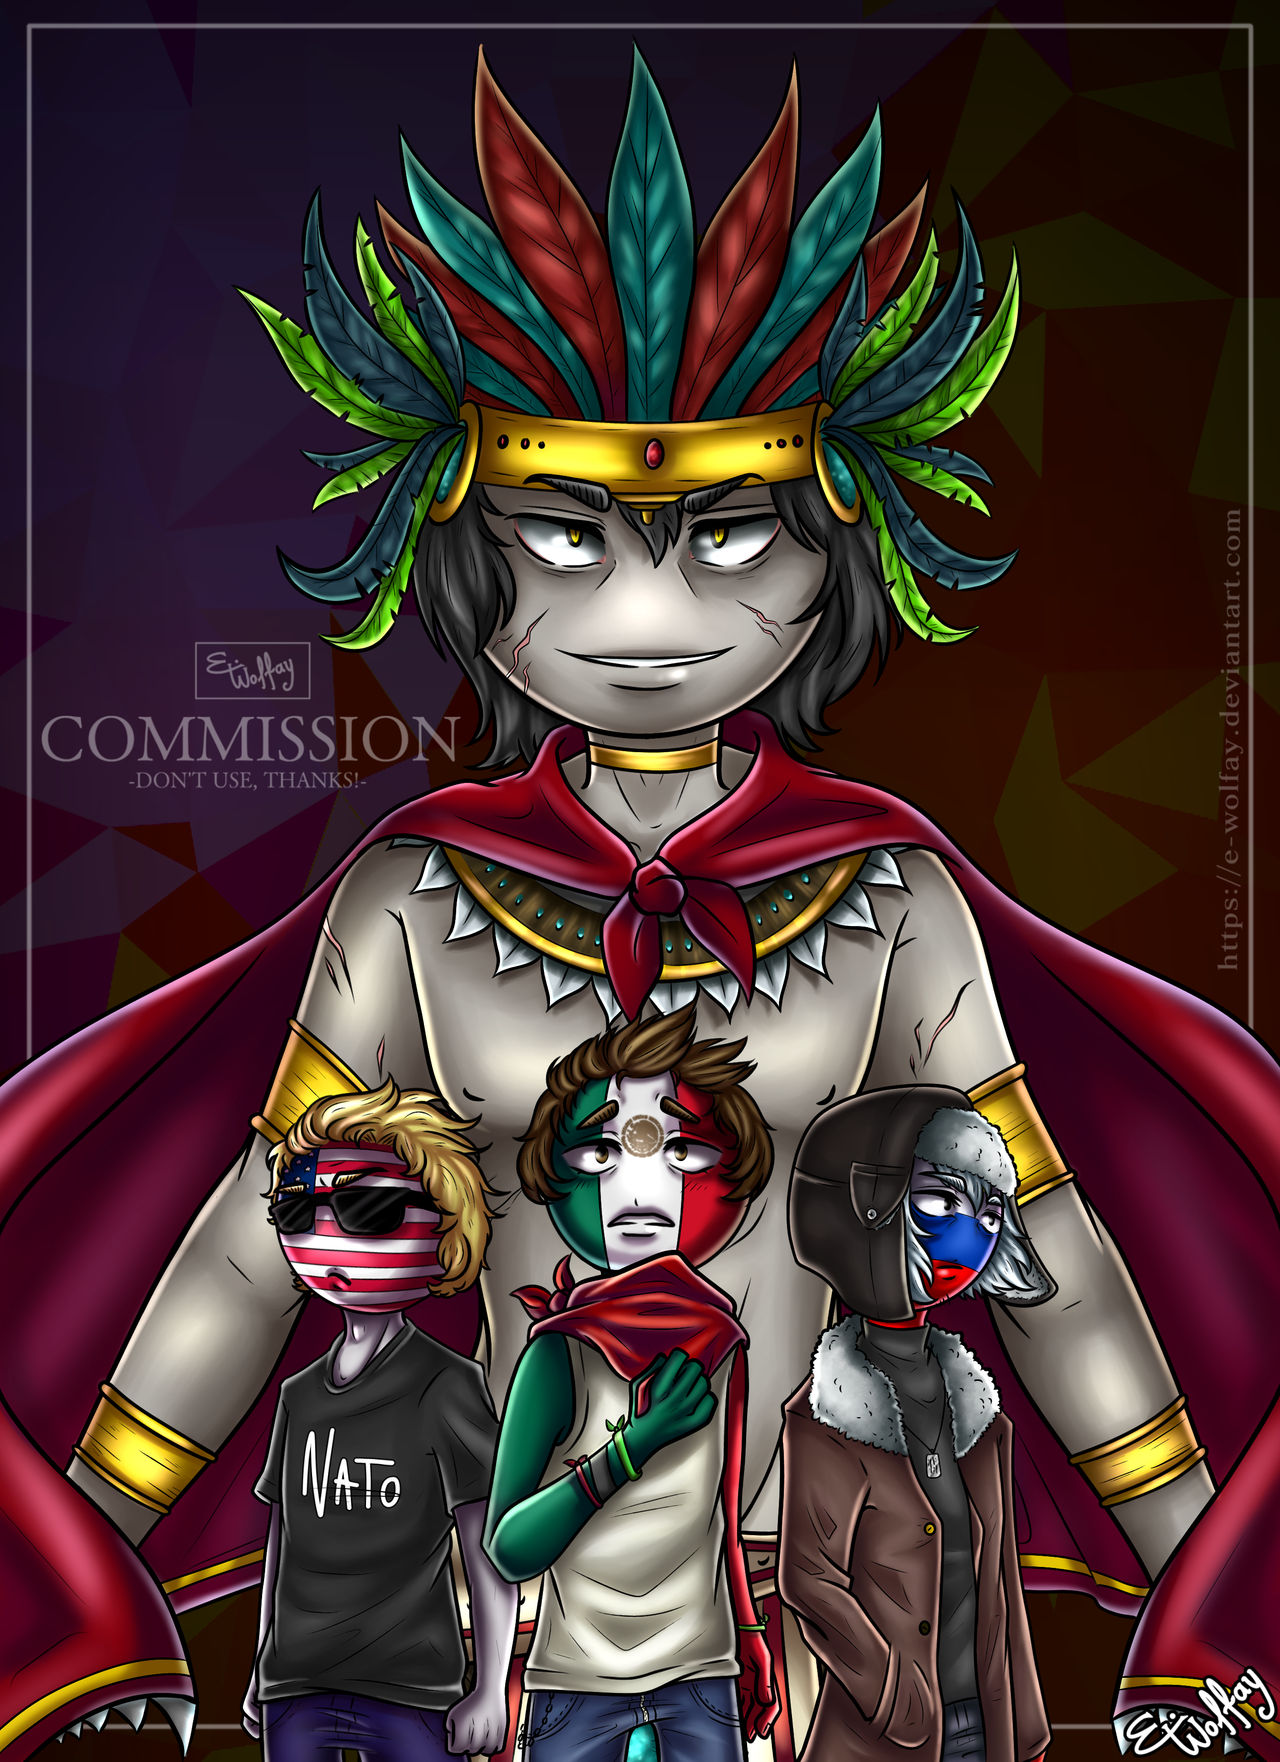 ArtStation - Countryhumans Battle of Midway, Countryhumans America,  Countryhumans Empire of Japan